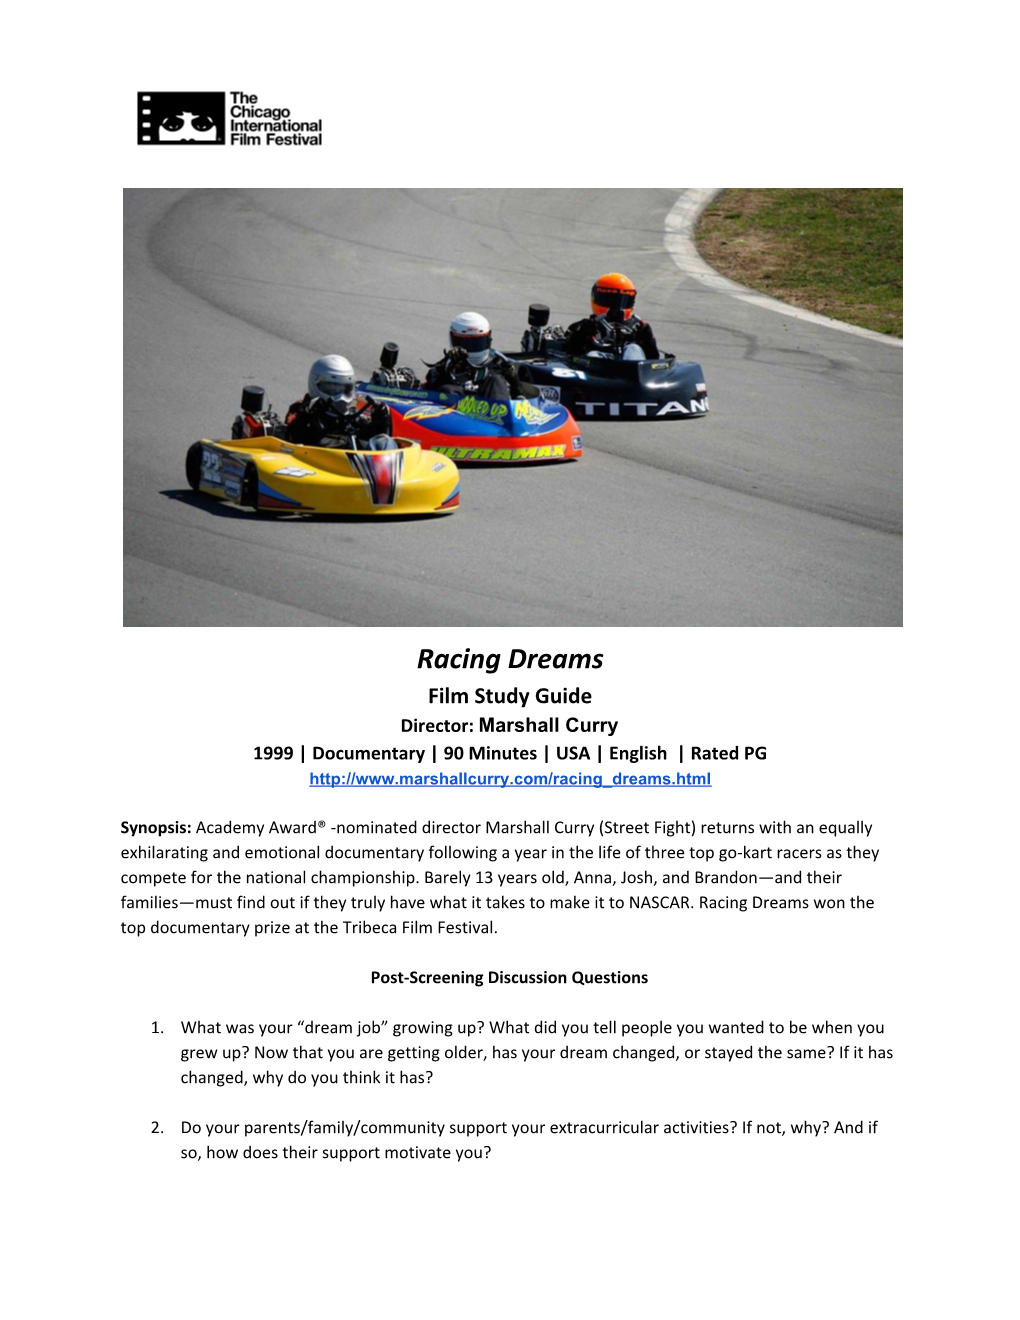 Racing Dreams Film Study Guide Director: Marshall Curry ​ 1999 | Documentary | 90 Minutes | USA | English | Rated PG